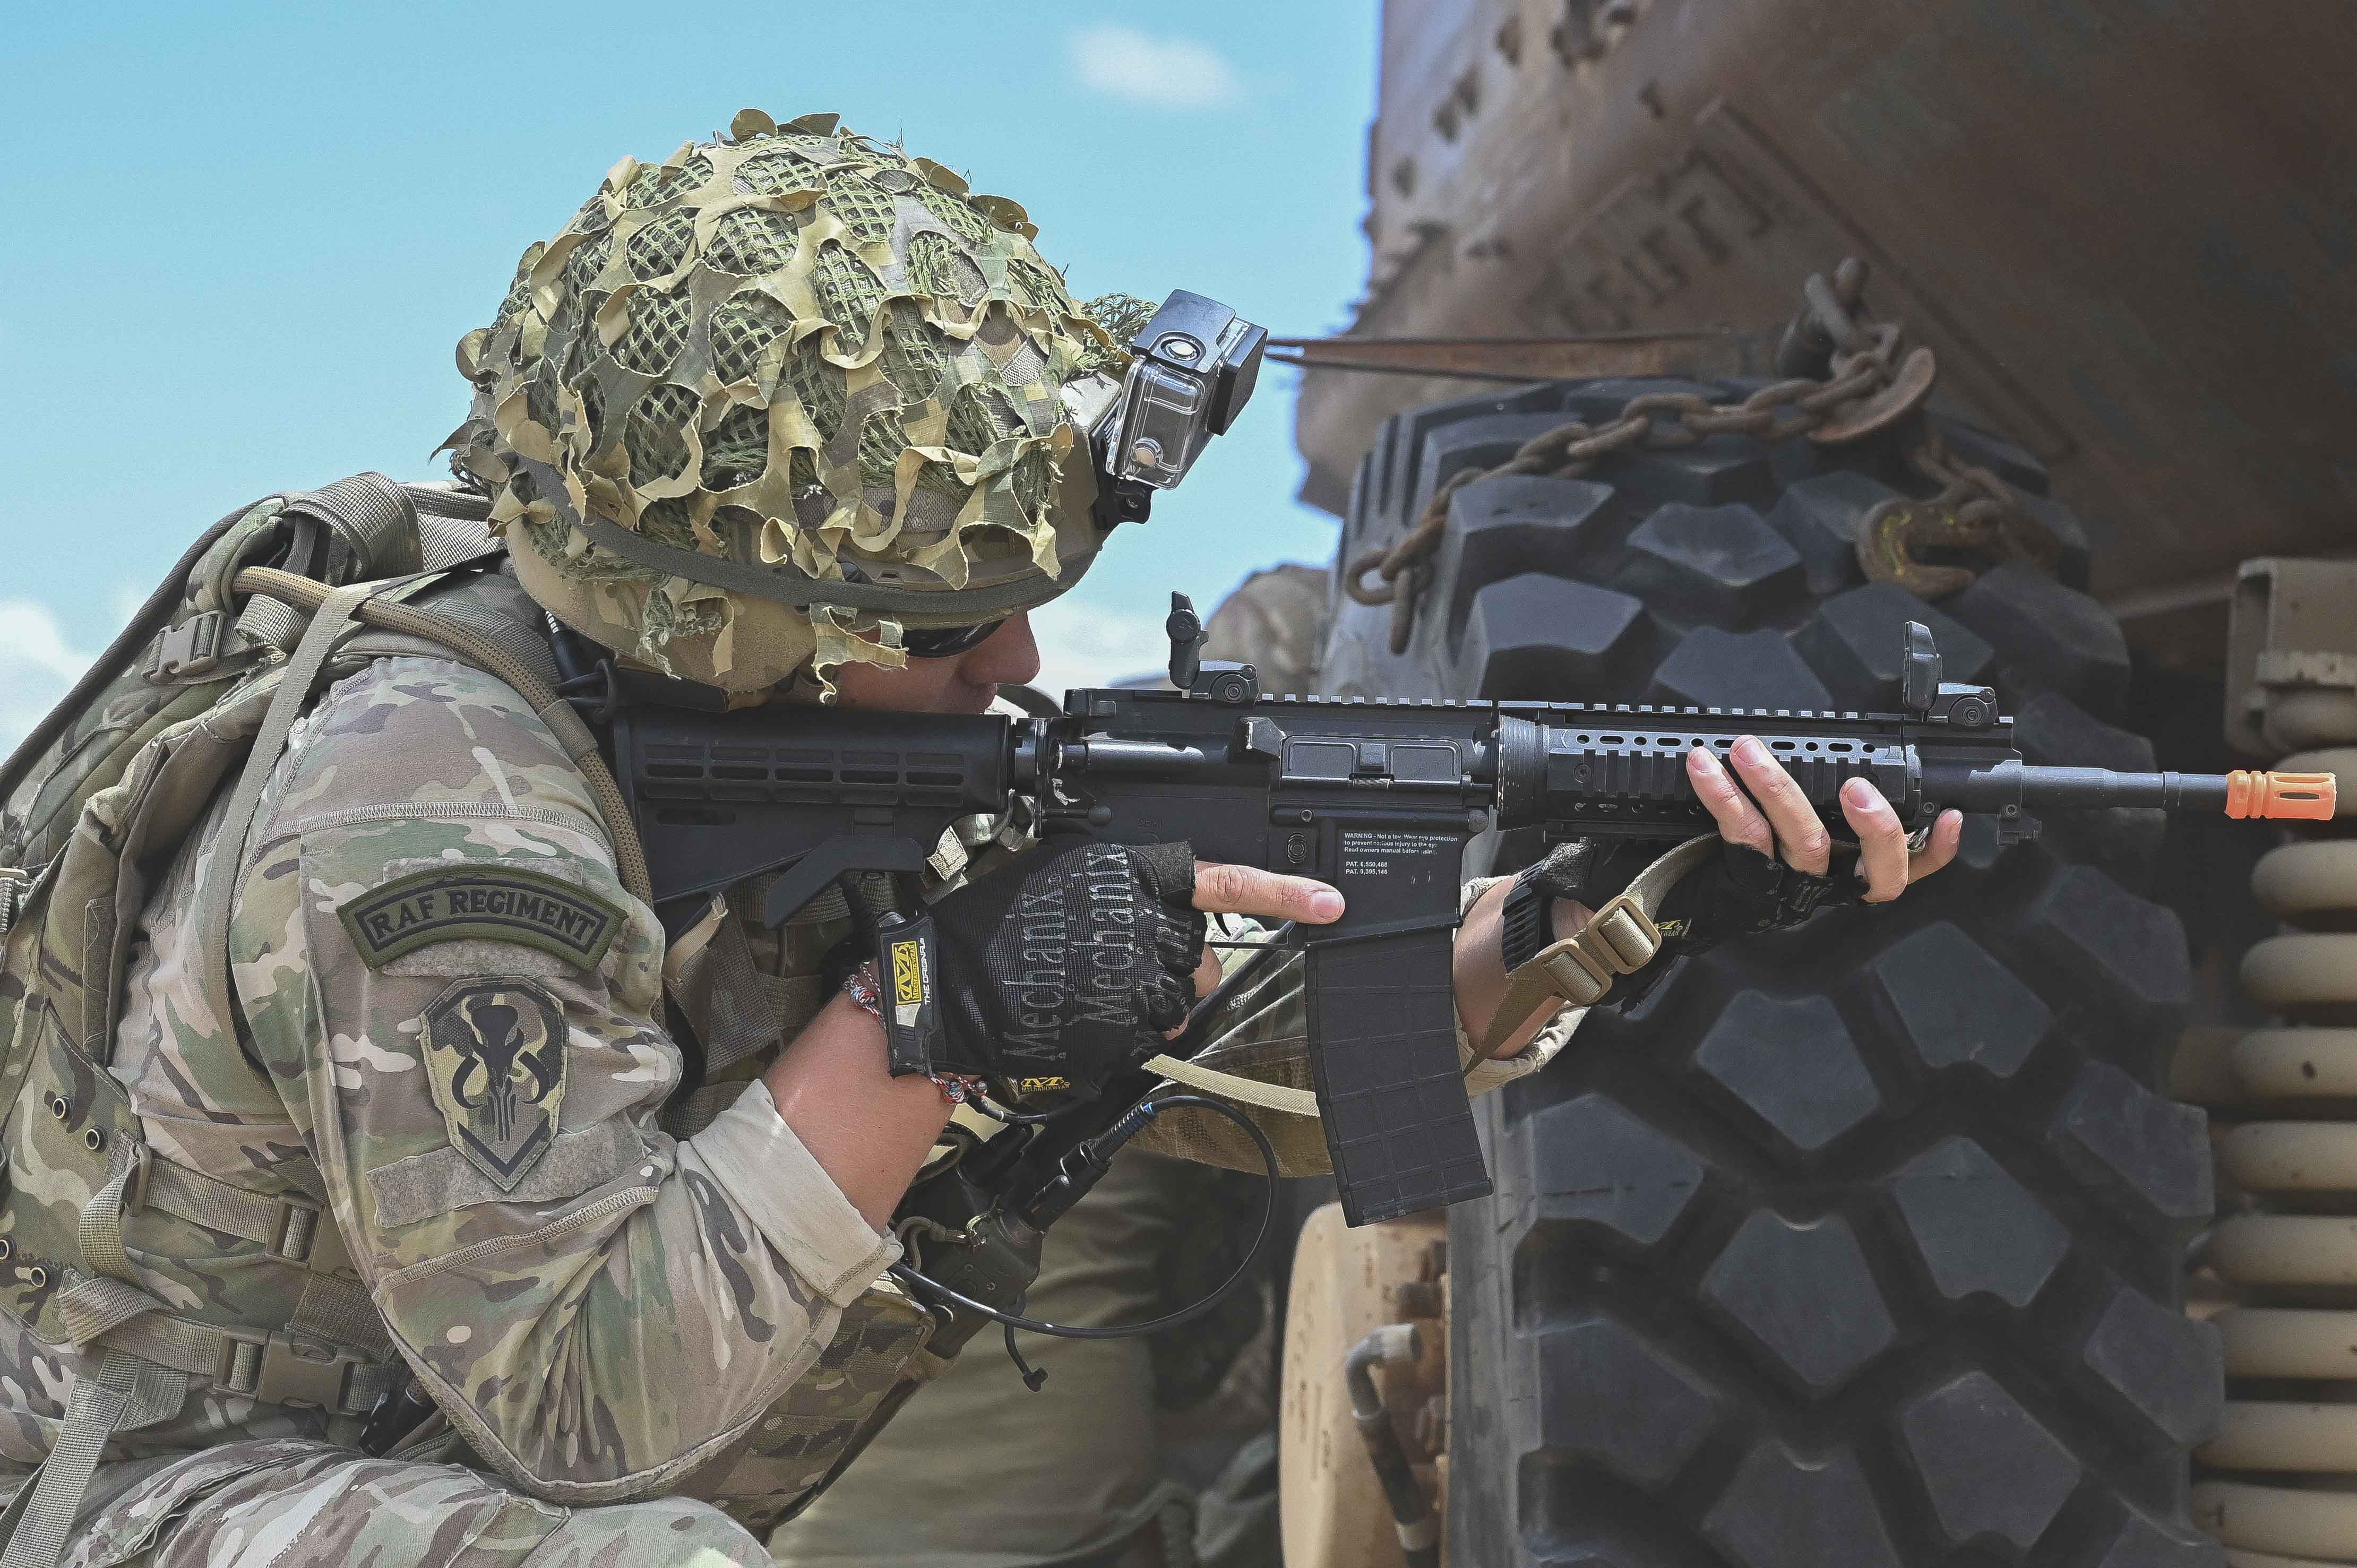 Image shows RAF Regiment with rifle, crouching by vehicle wheel.